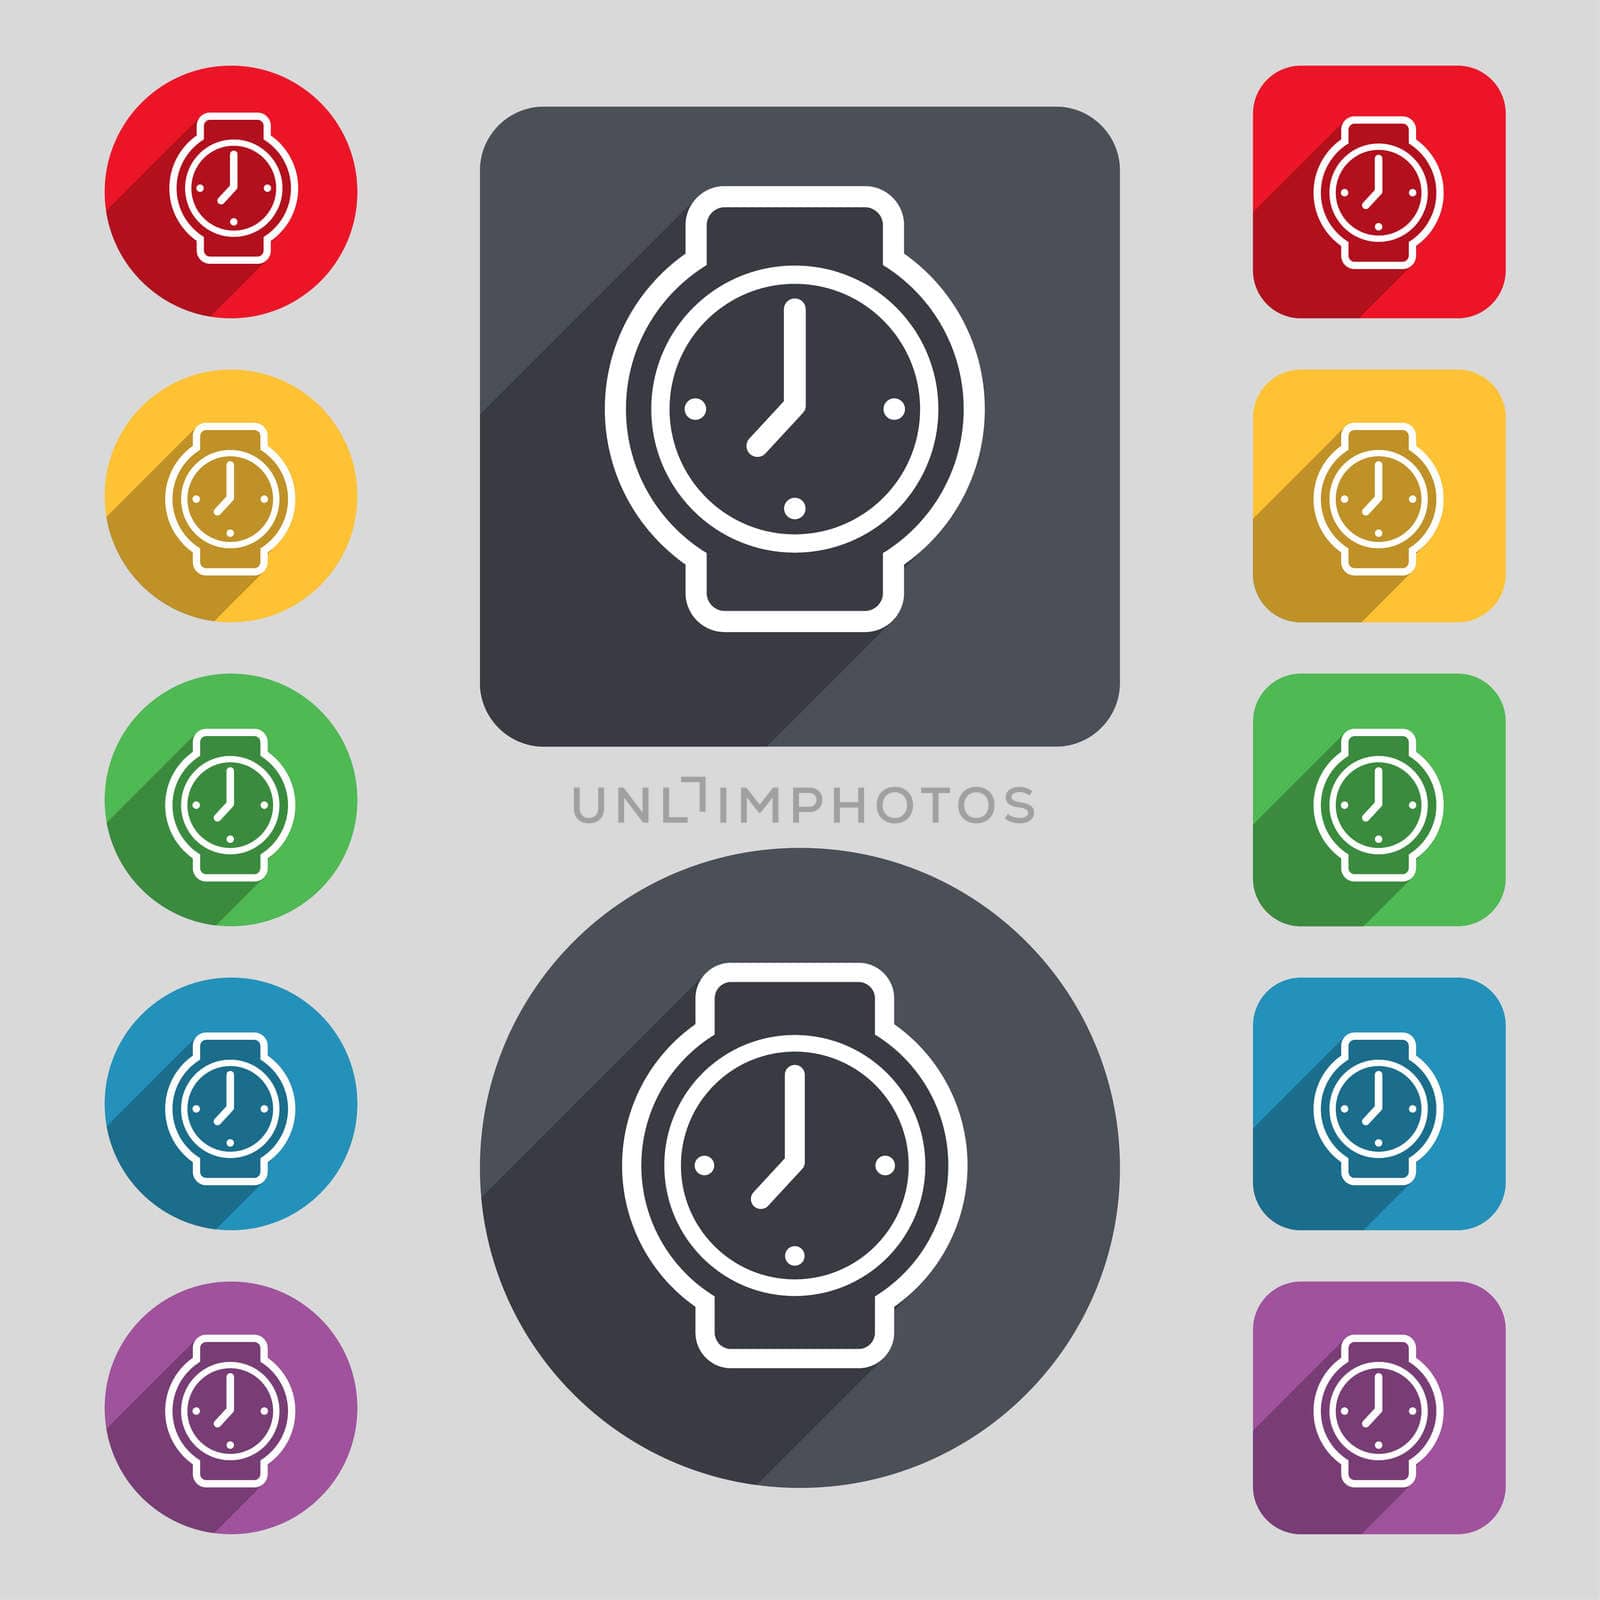 watches icon sign. A set of 12 colored buttons and a long shadow. Flat design. illustration